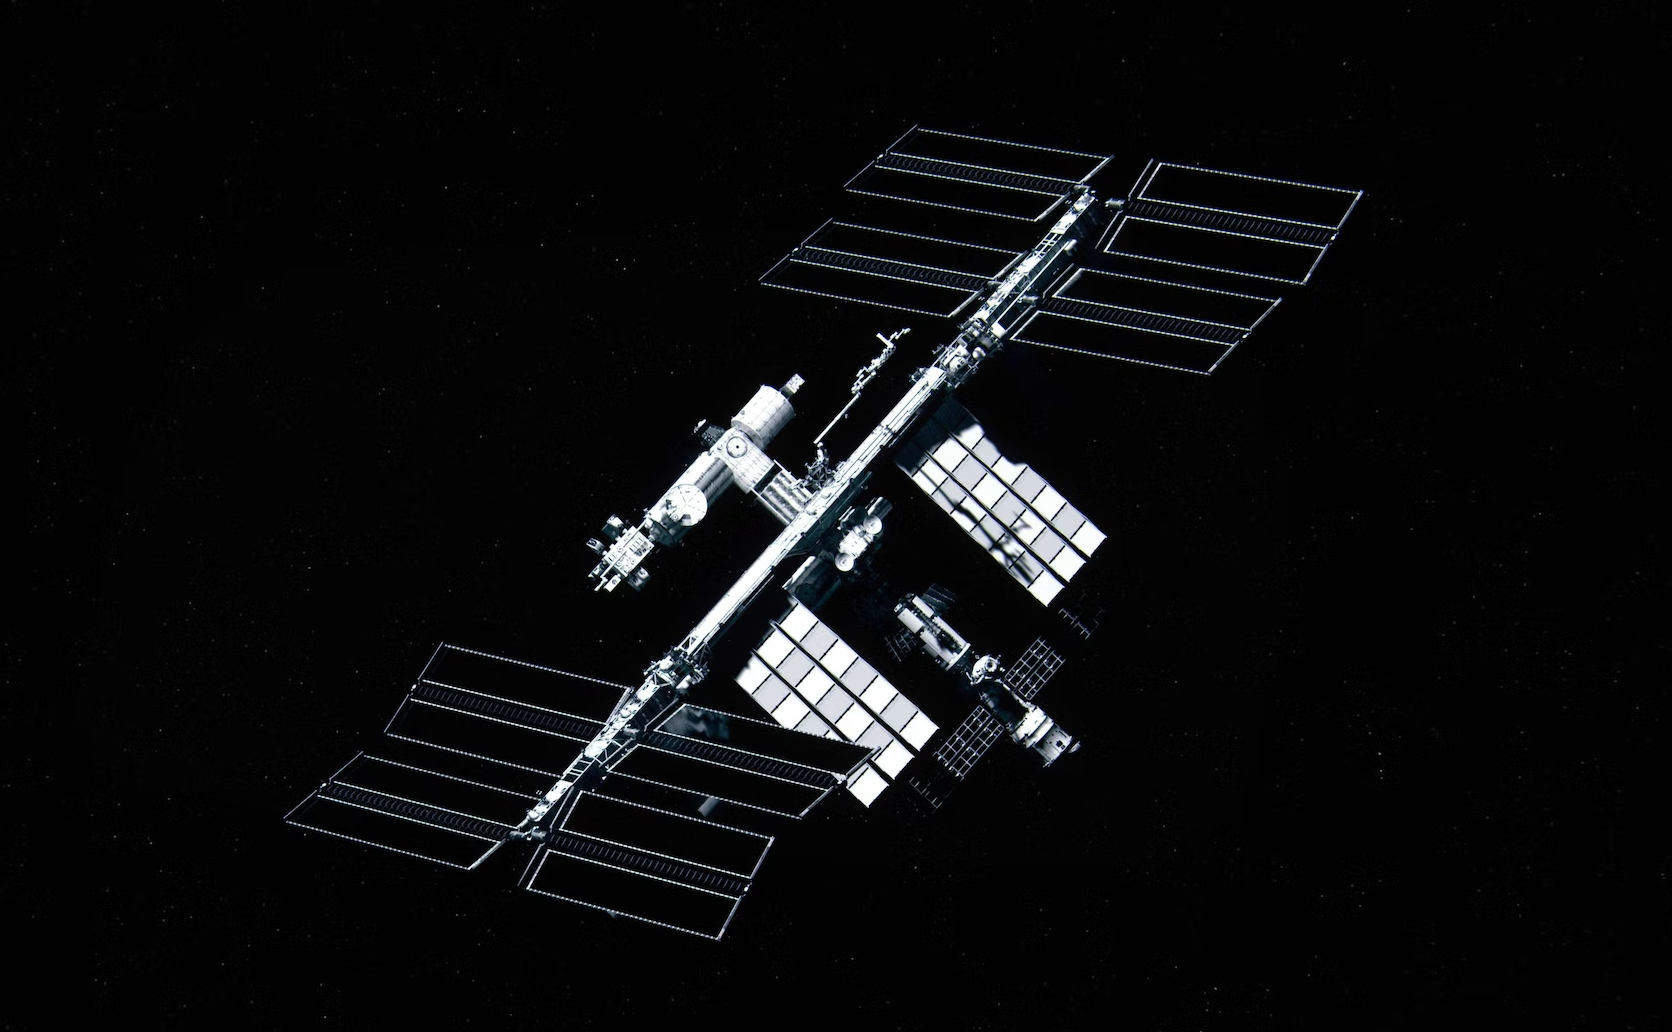 NASA SpaceX Crew-6 Dragon Endeavour Station Docking on ISS